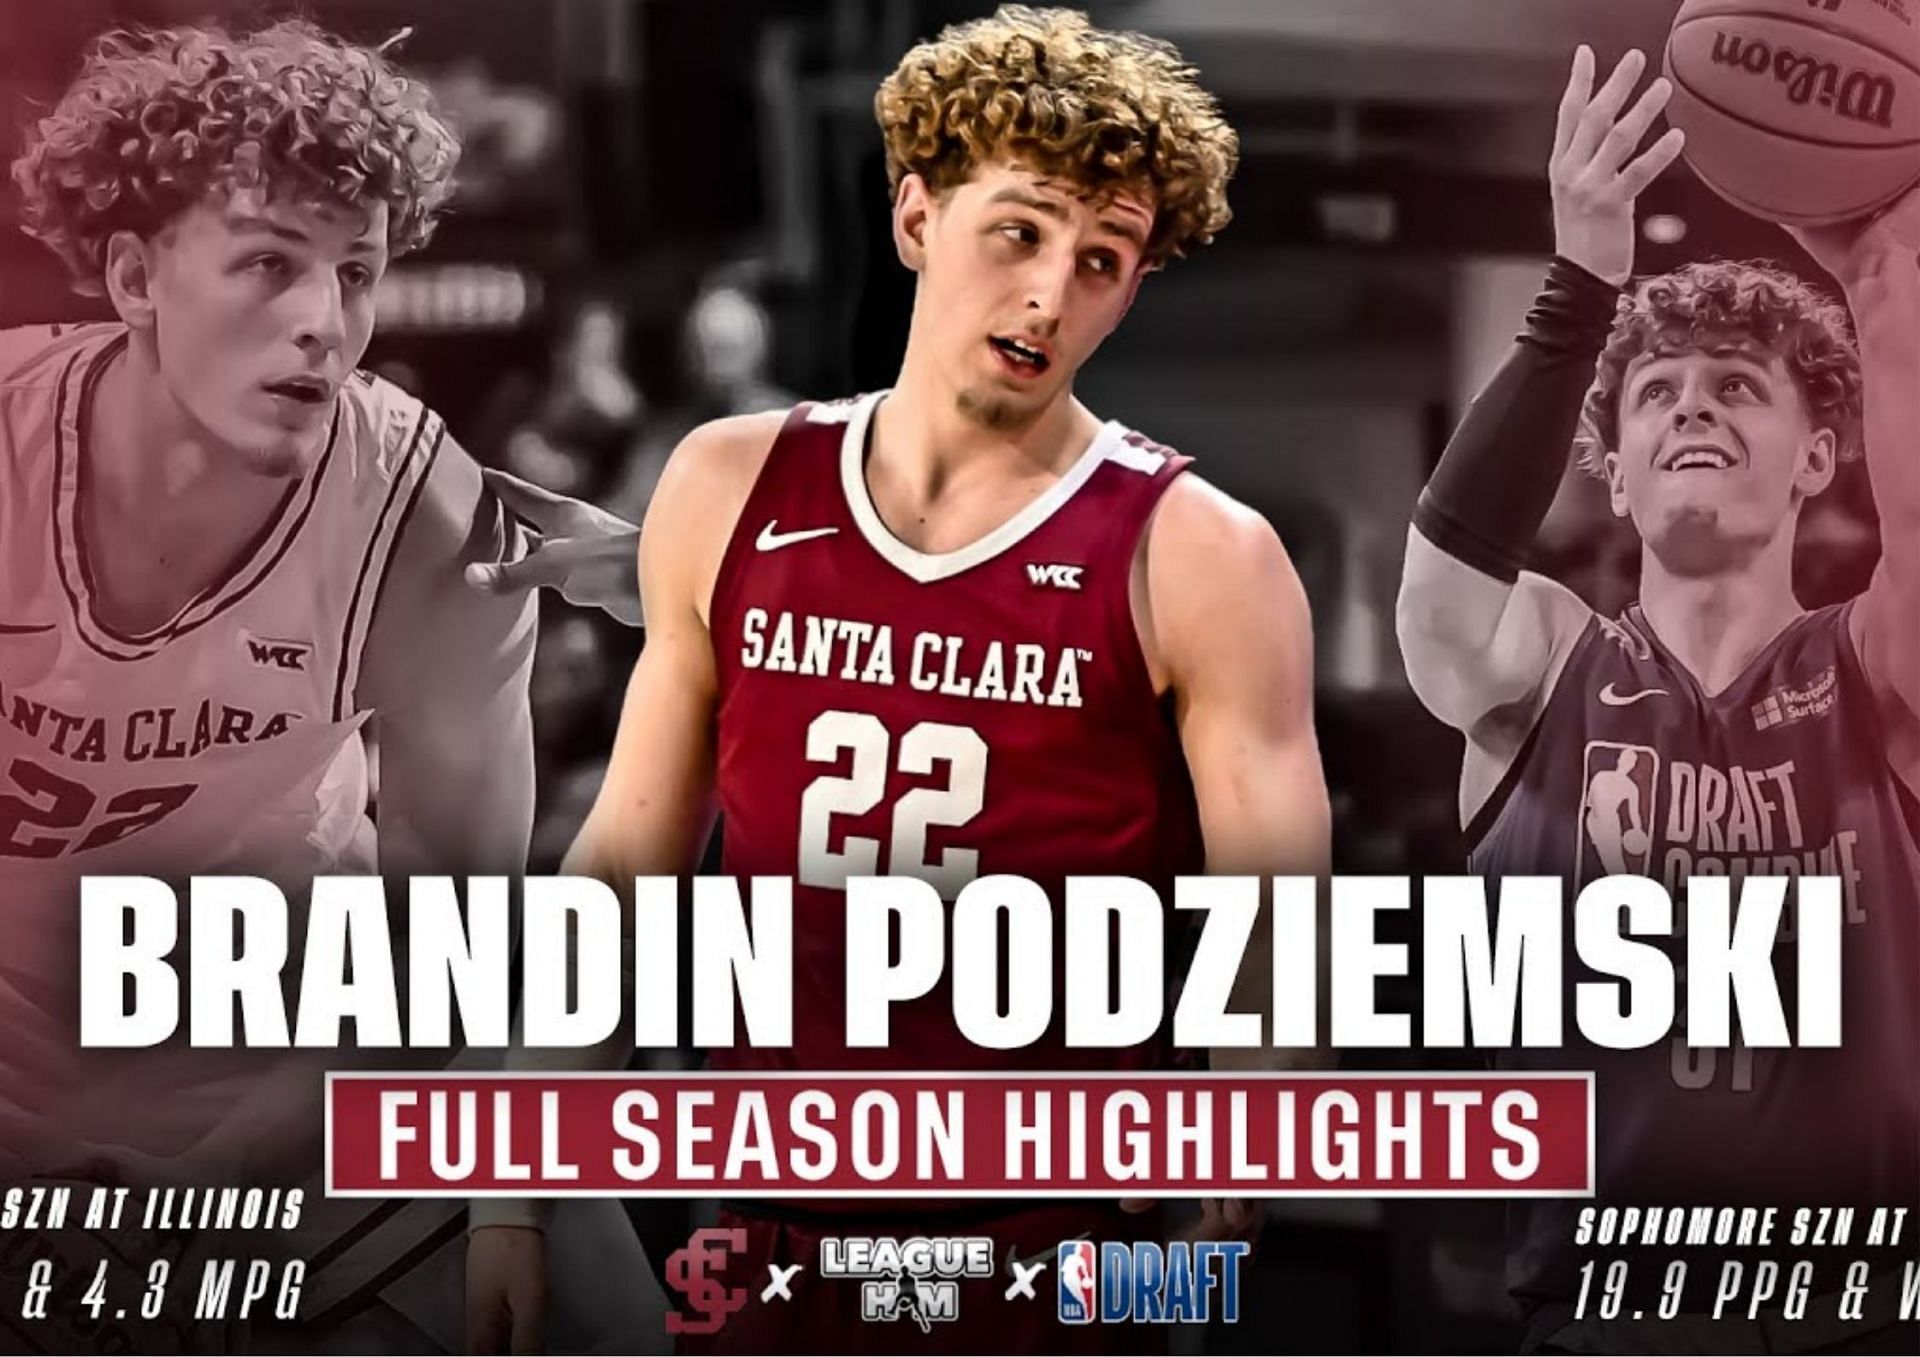 Brandin Podziemski brings superb outside shooting, rebounding and grit to any team who picks him in the 2023 NBA Draft.